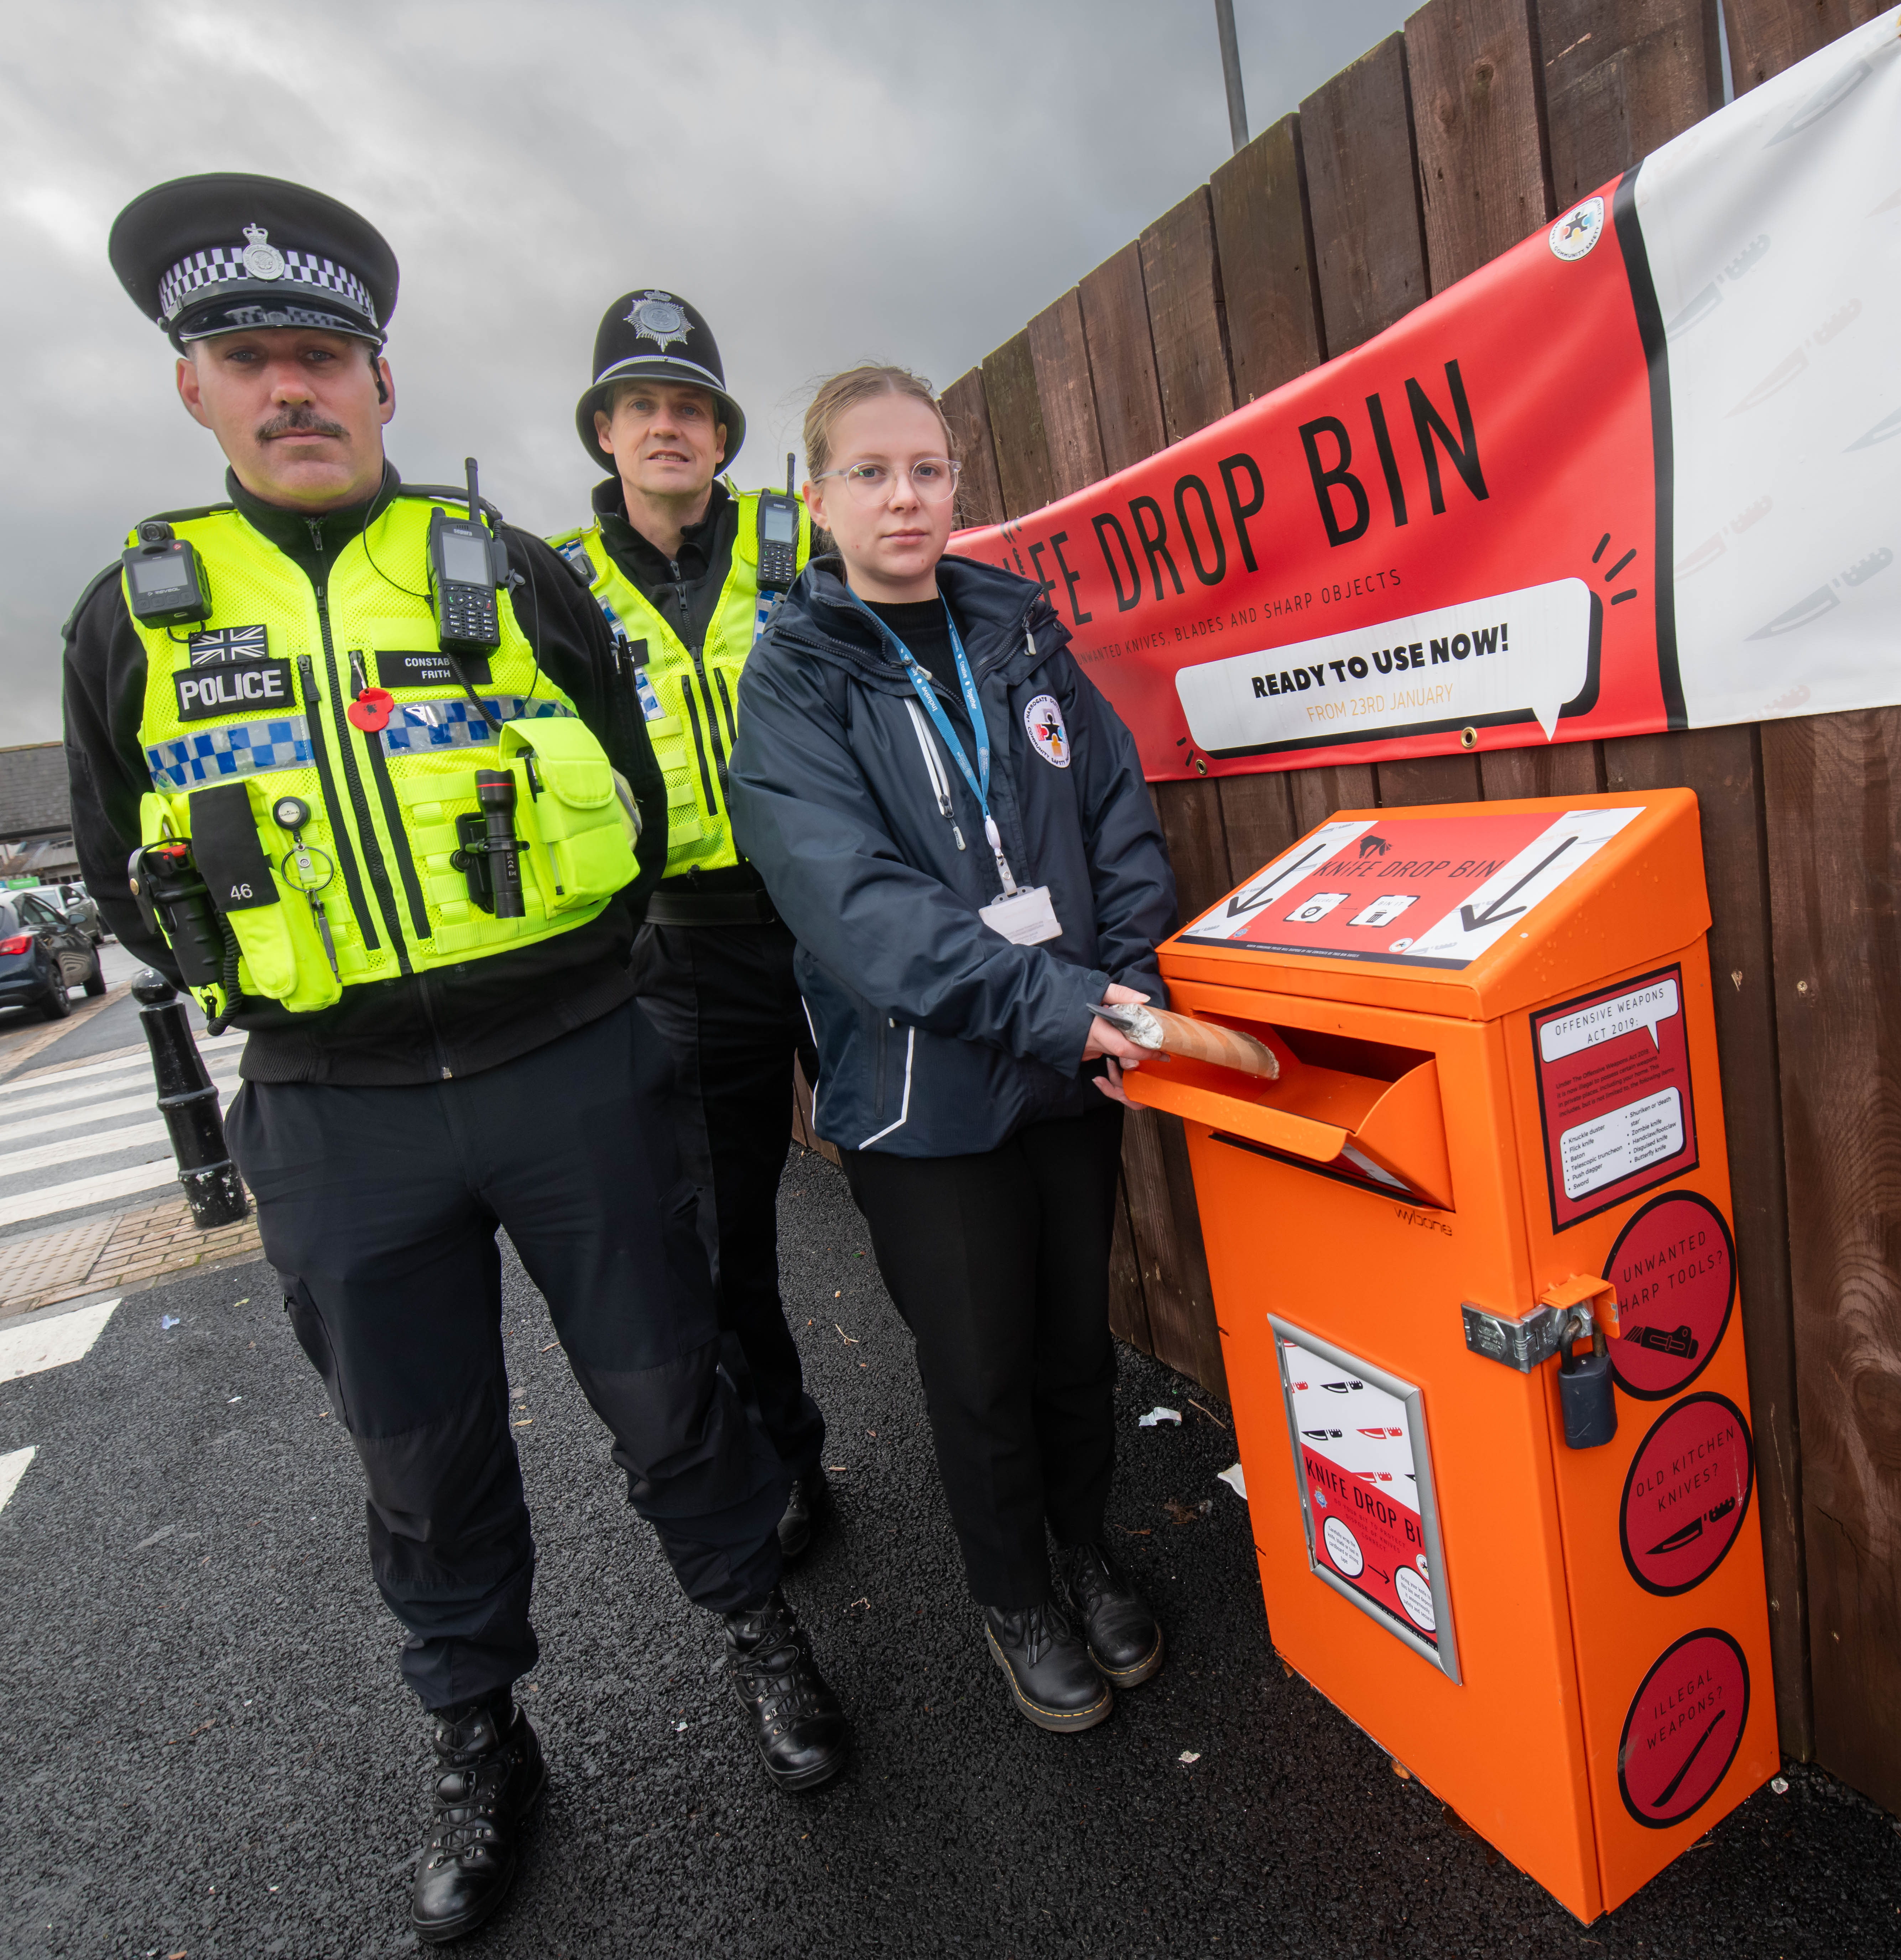 Community safety officer, Evie Griffiths, with North Yorkshire Police officers, PCs Kelvin Troughton and Brendon Frith, at the knife drop bin in Harrogate